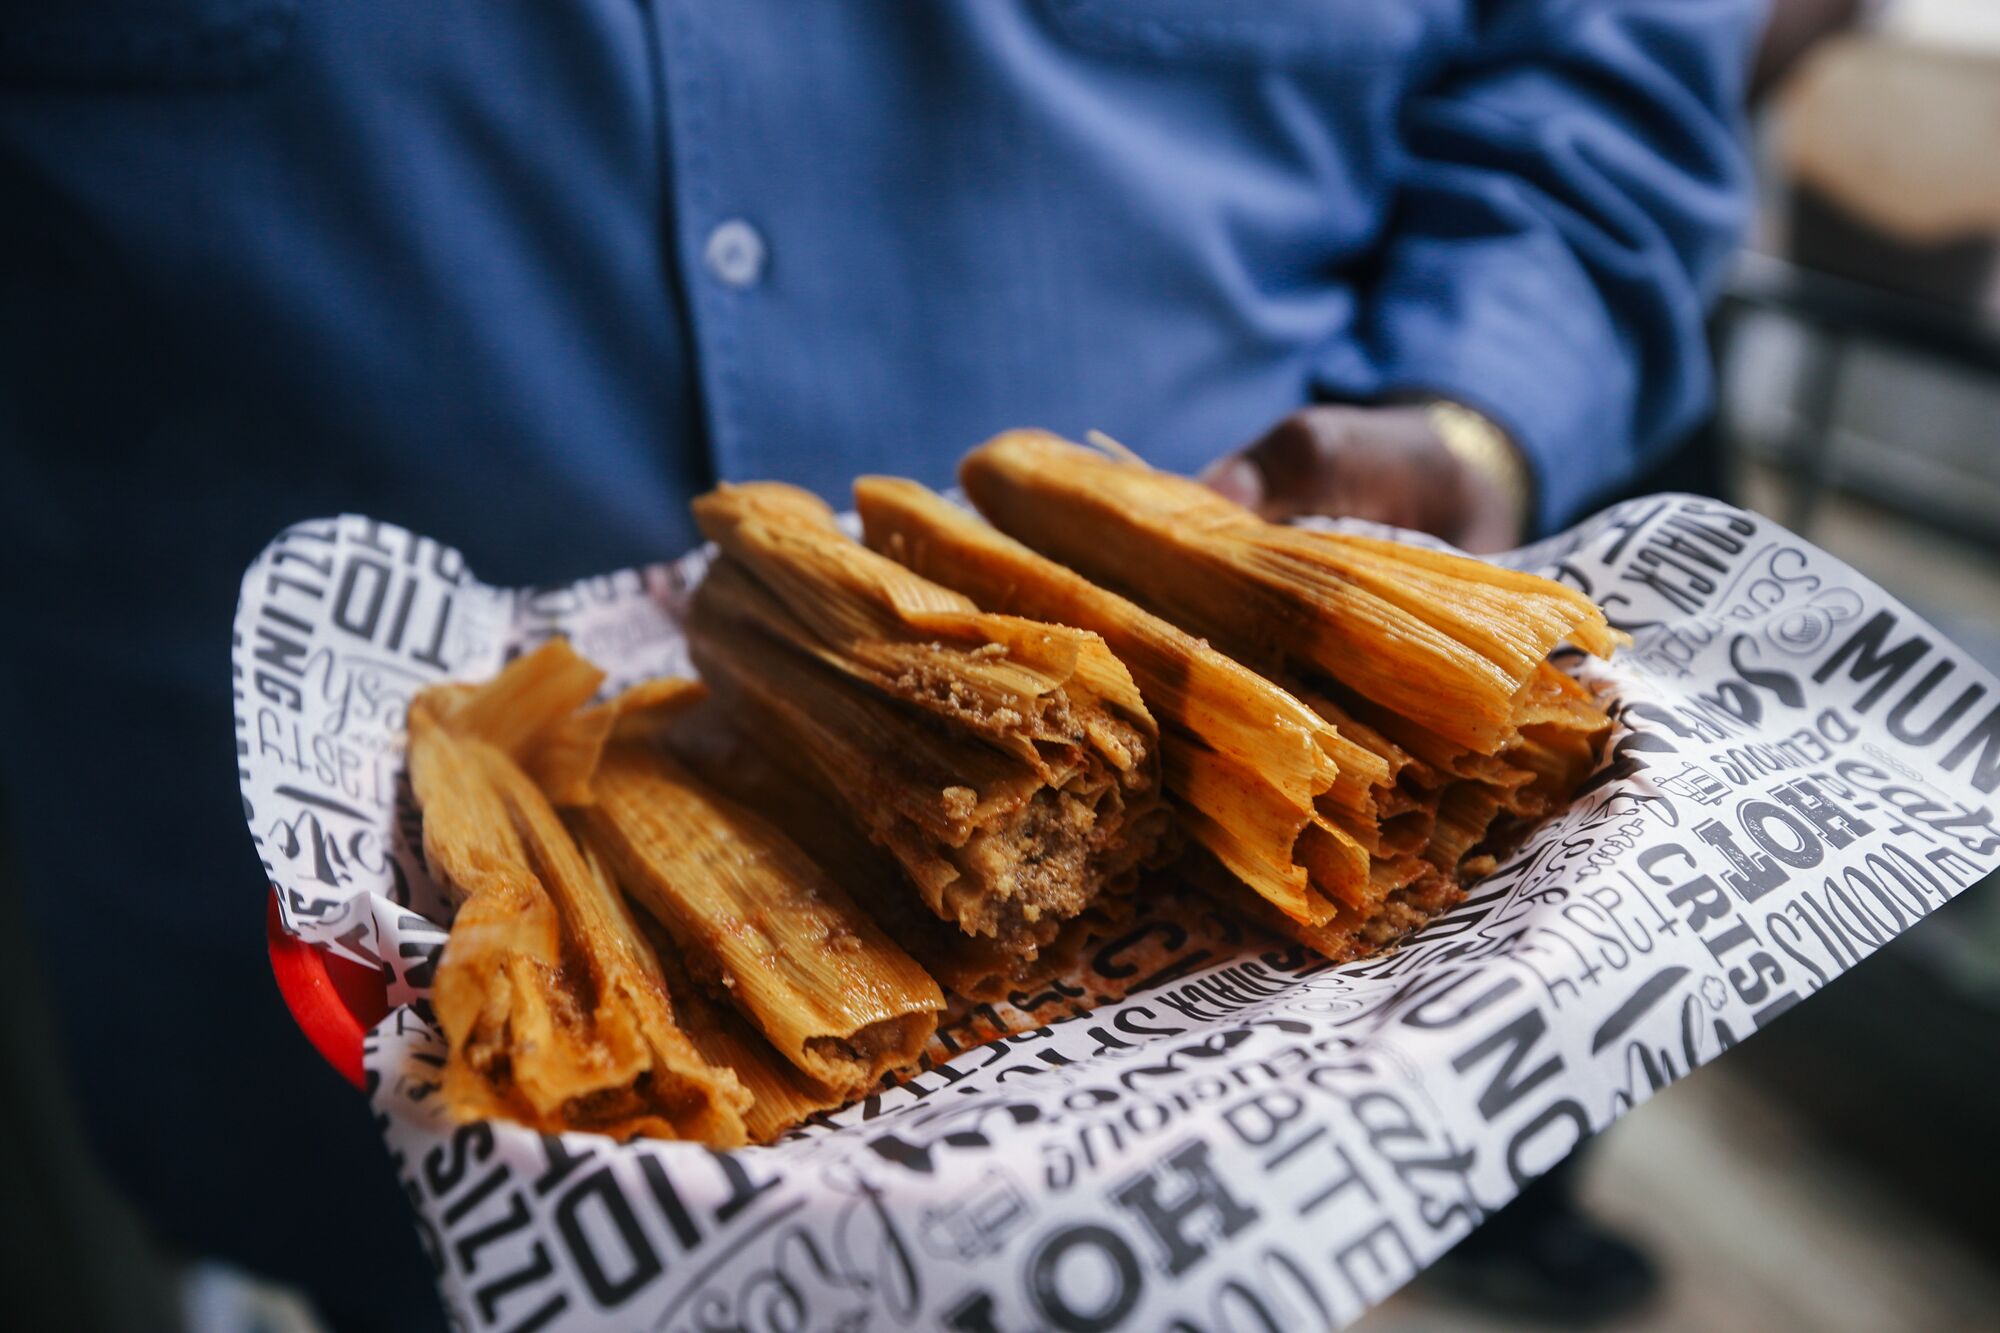 A person holds an order of wrapped and unwrapped tamales.